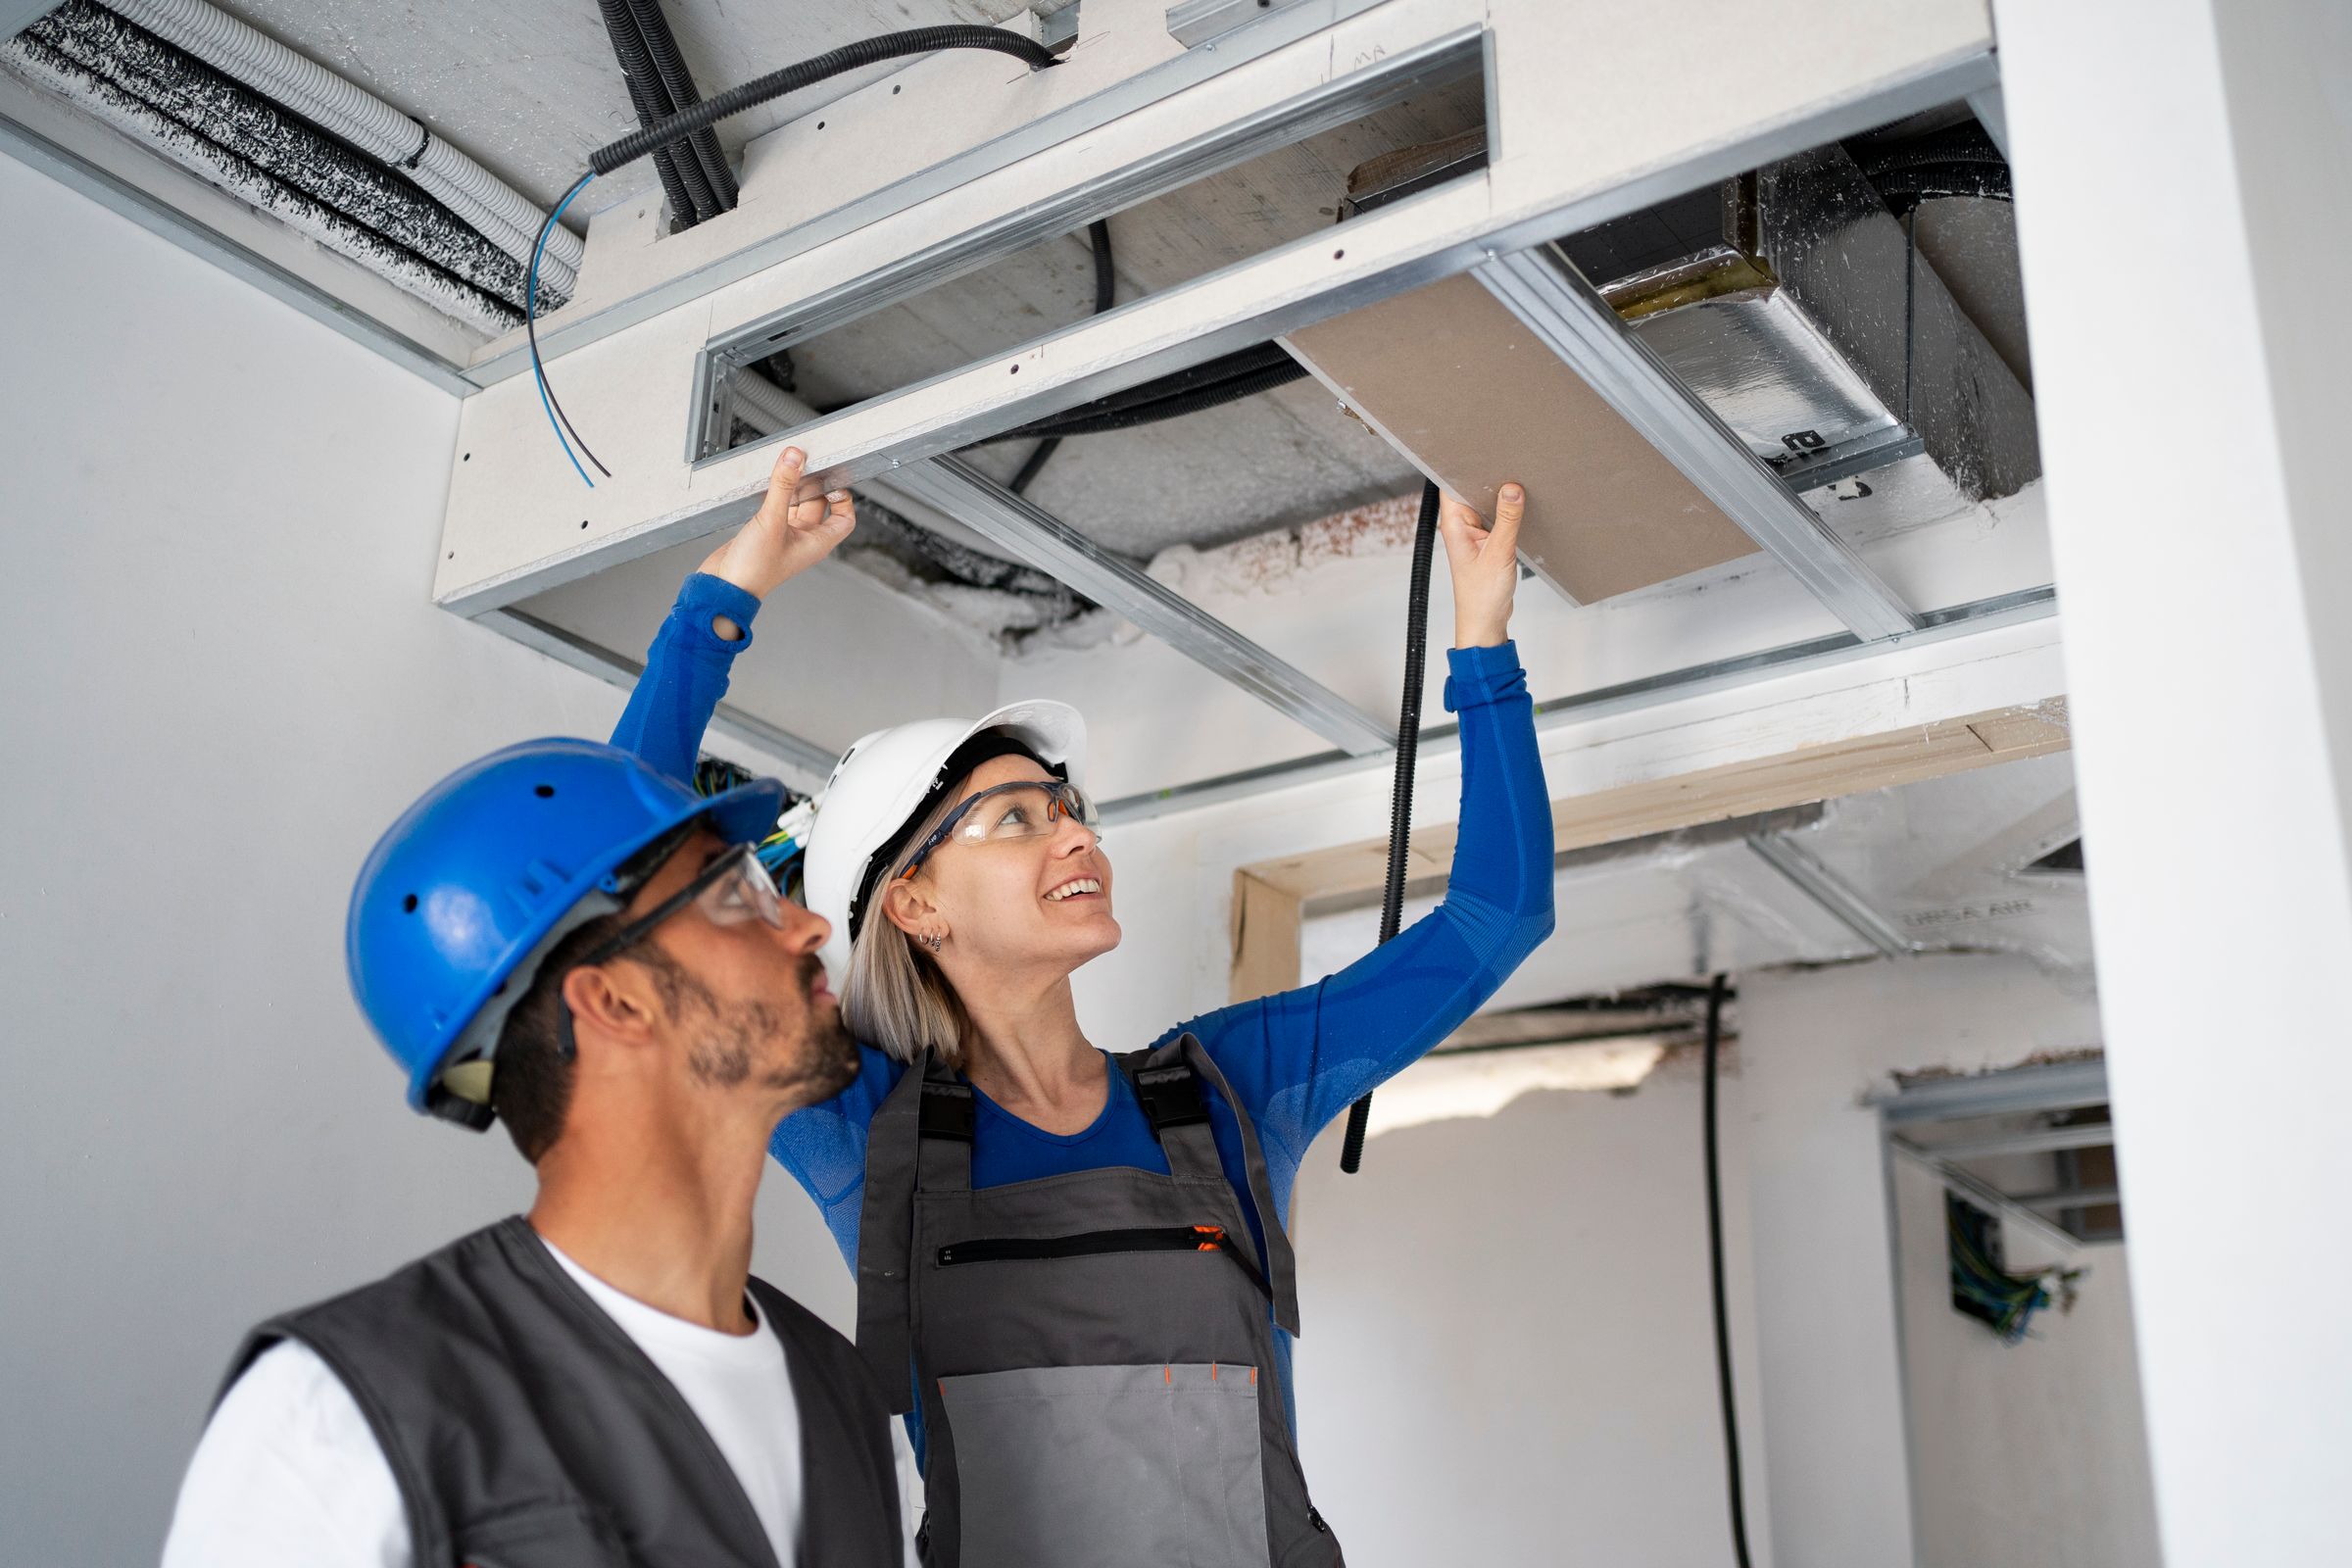 Explore HVAC tips and tricks to maximize energy efficiency in your home with BuiltHomes.